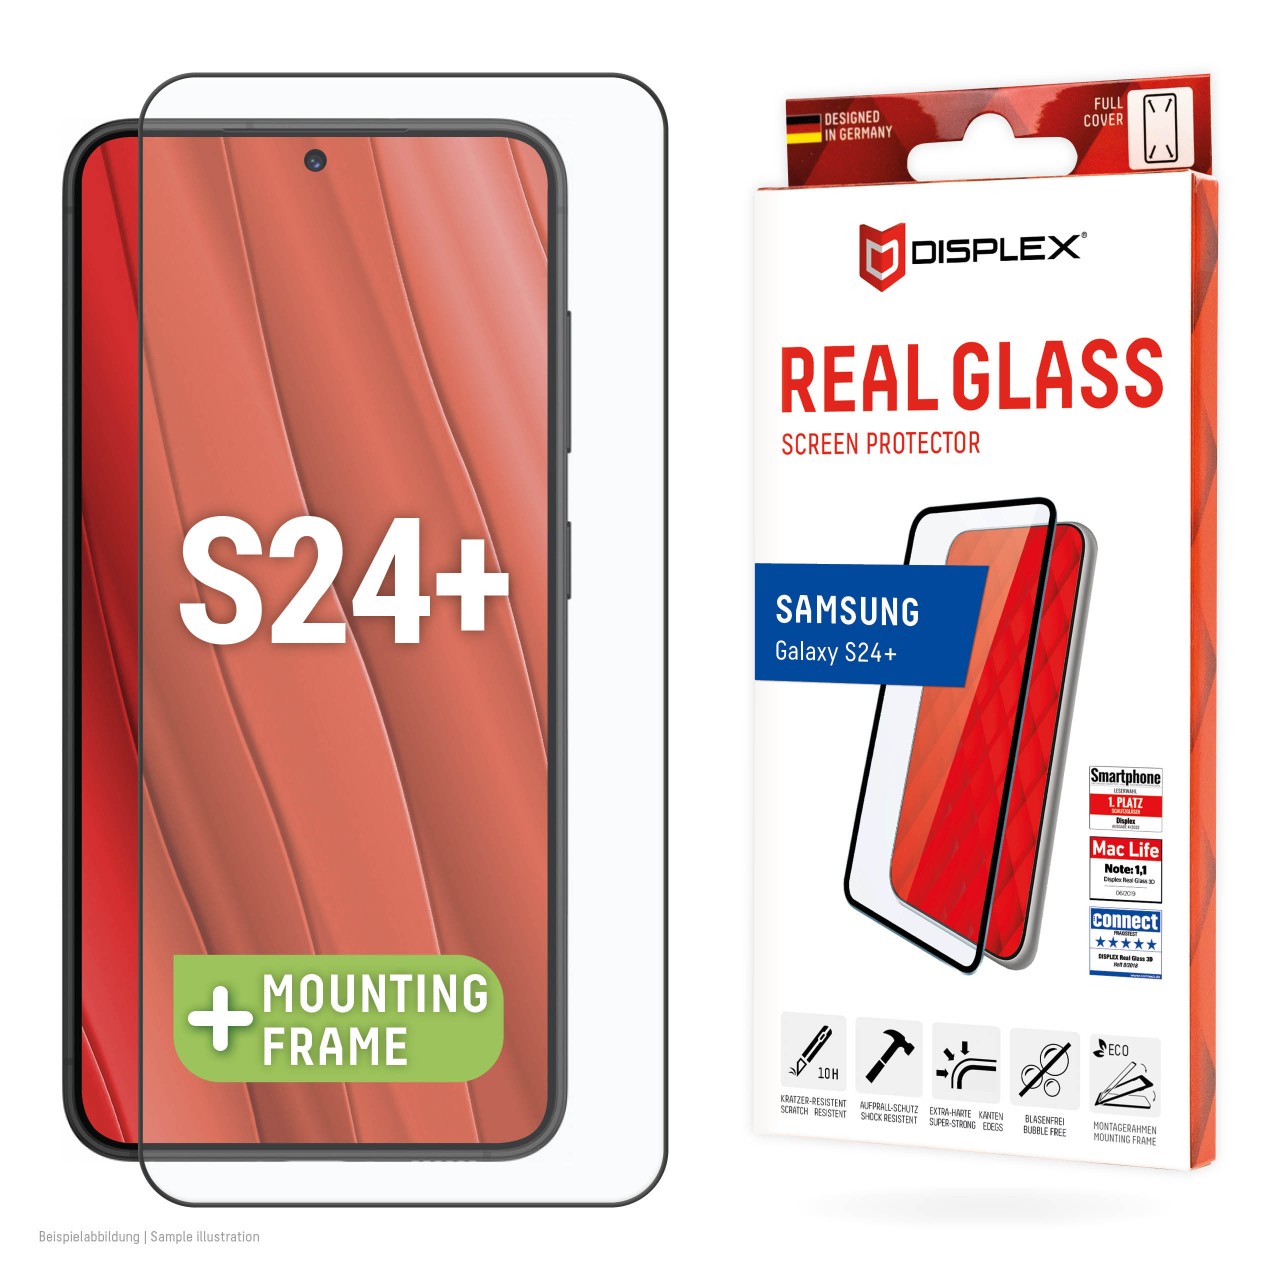 Samsung Galaxy S24+ Full Cover Screen Protector